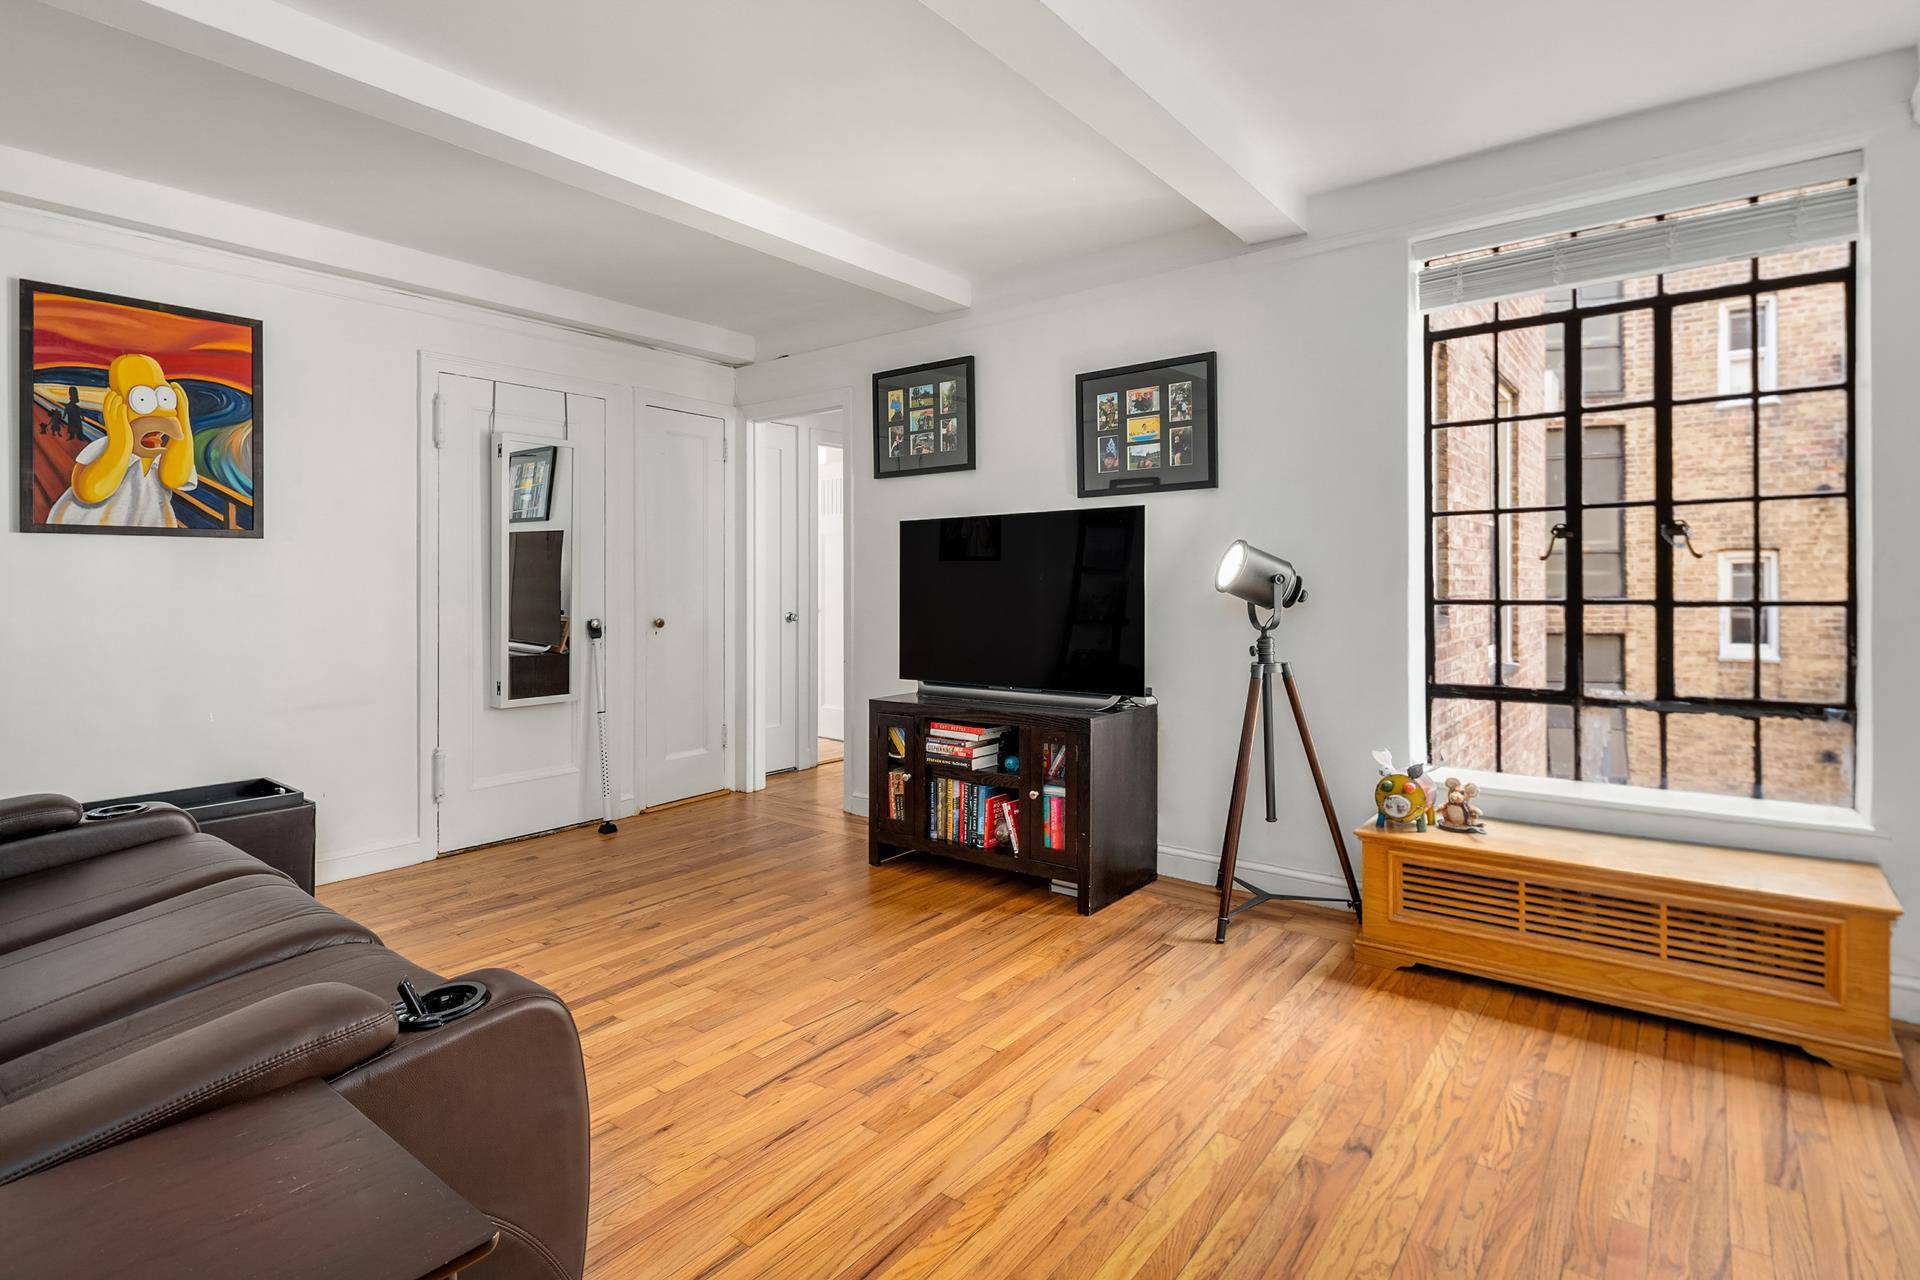 Own a unique and rare property in Tudor City's best prewar cooperative building The Manor.